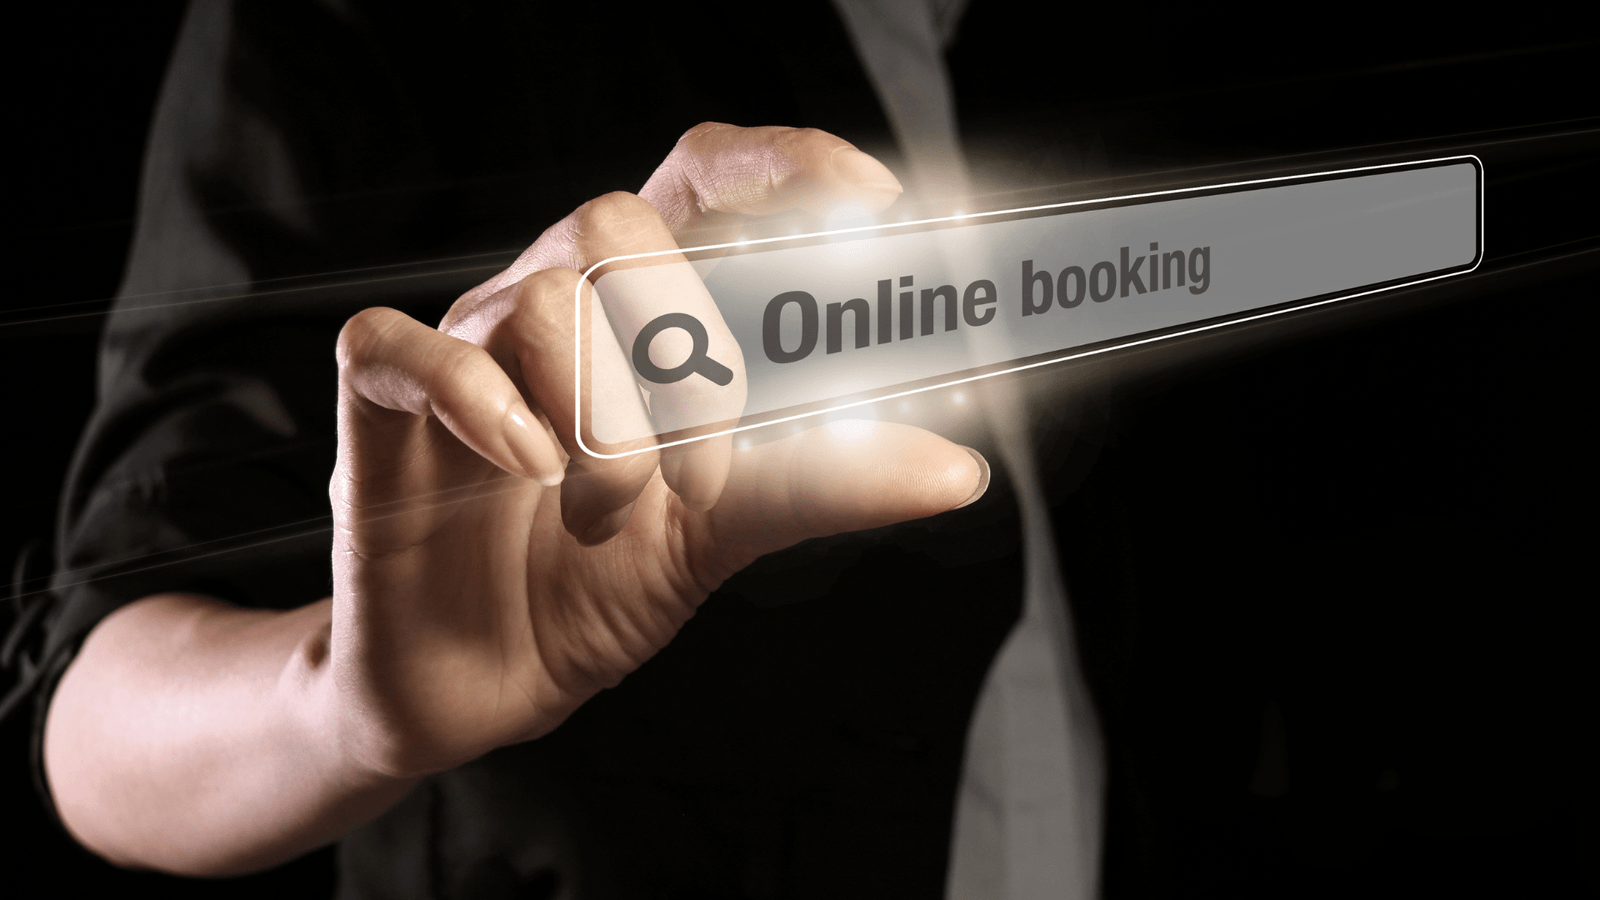 Search bar wrote (Online booking)